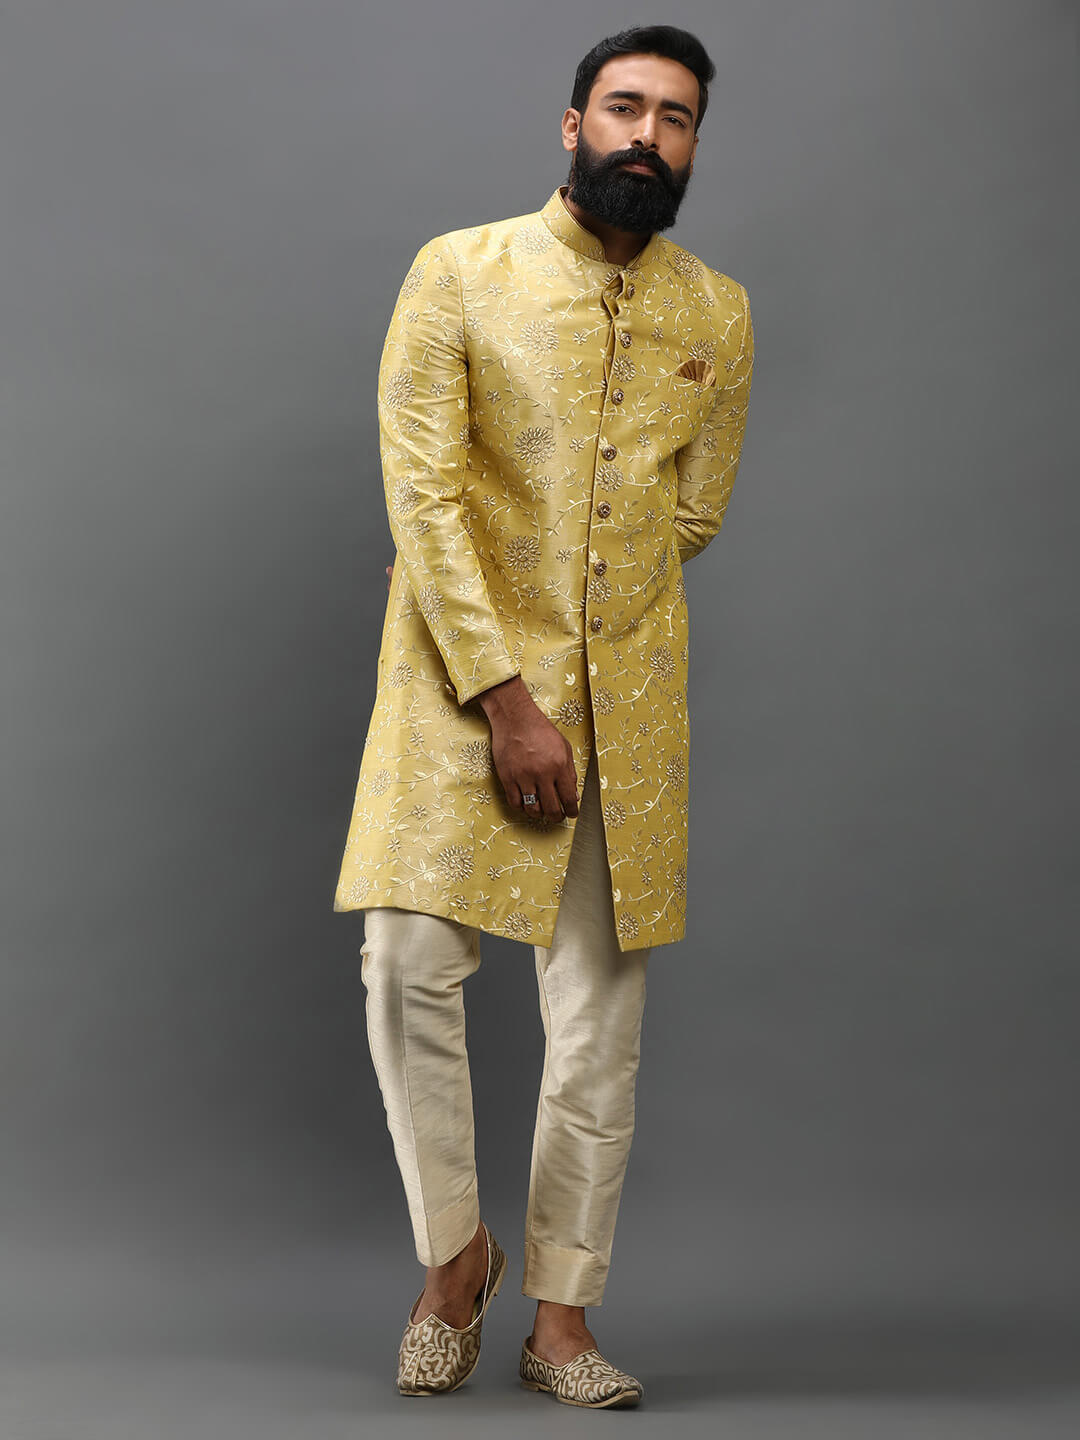 subtle-yellow-floral-embroidered-sherwani